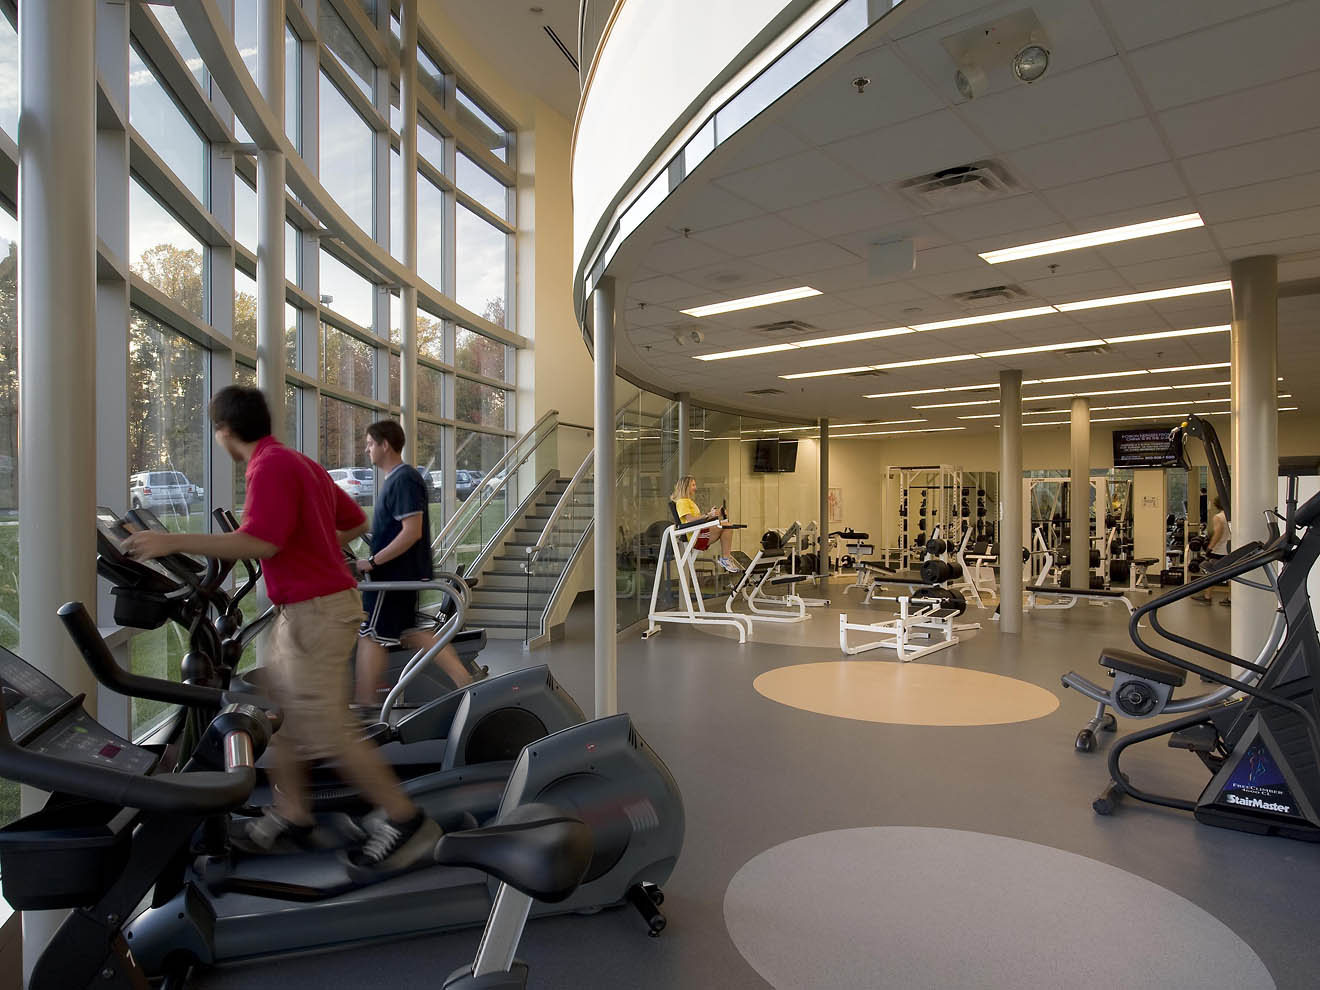 west valley city family fitness center rec center about